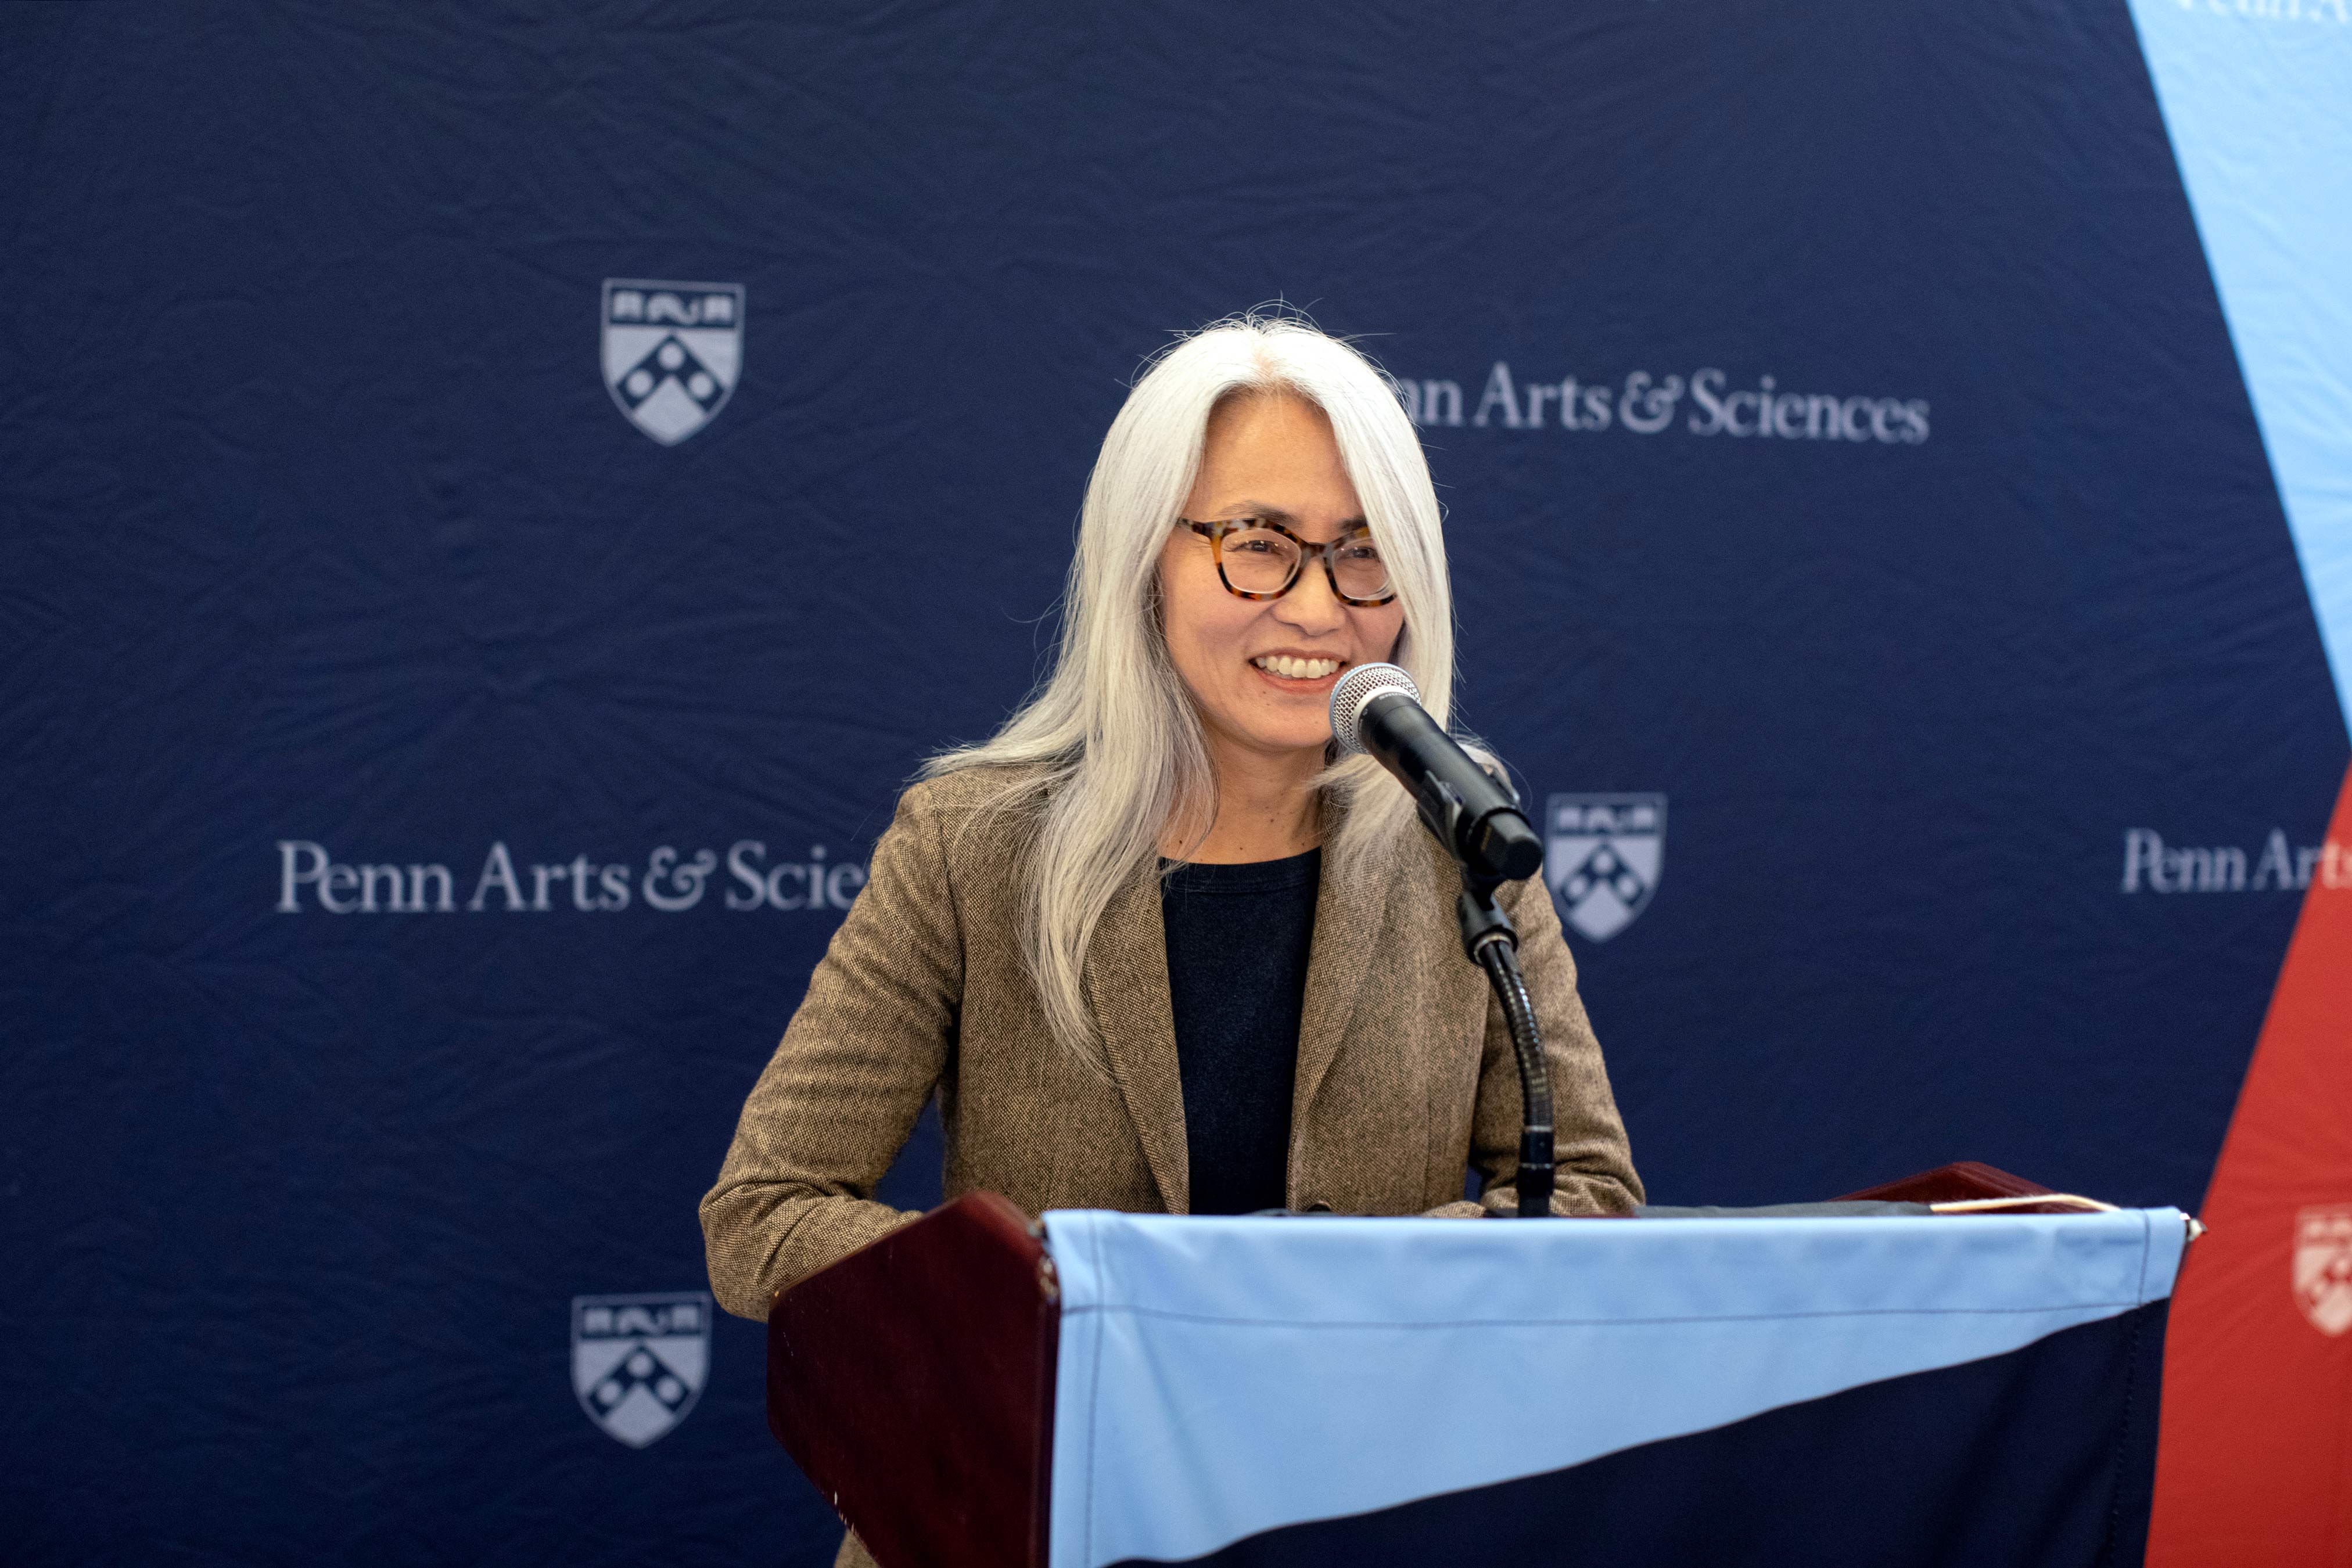 Josephine Park standing in front of a podium and speaking into a microphone, smiling. Behind her is a backdrop with the Penn shield and "Penn Arts & Sciences" repeated in a pattern.